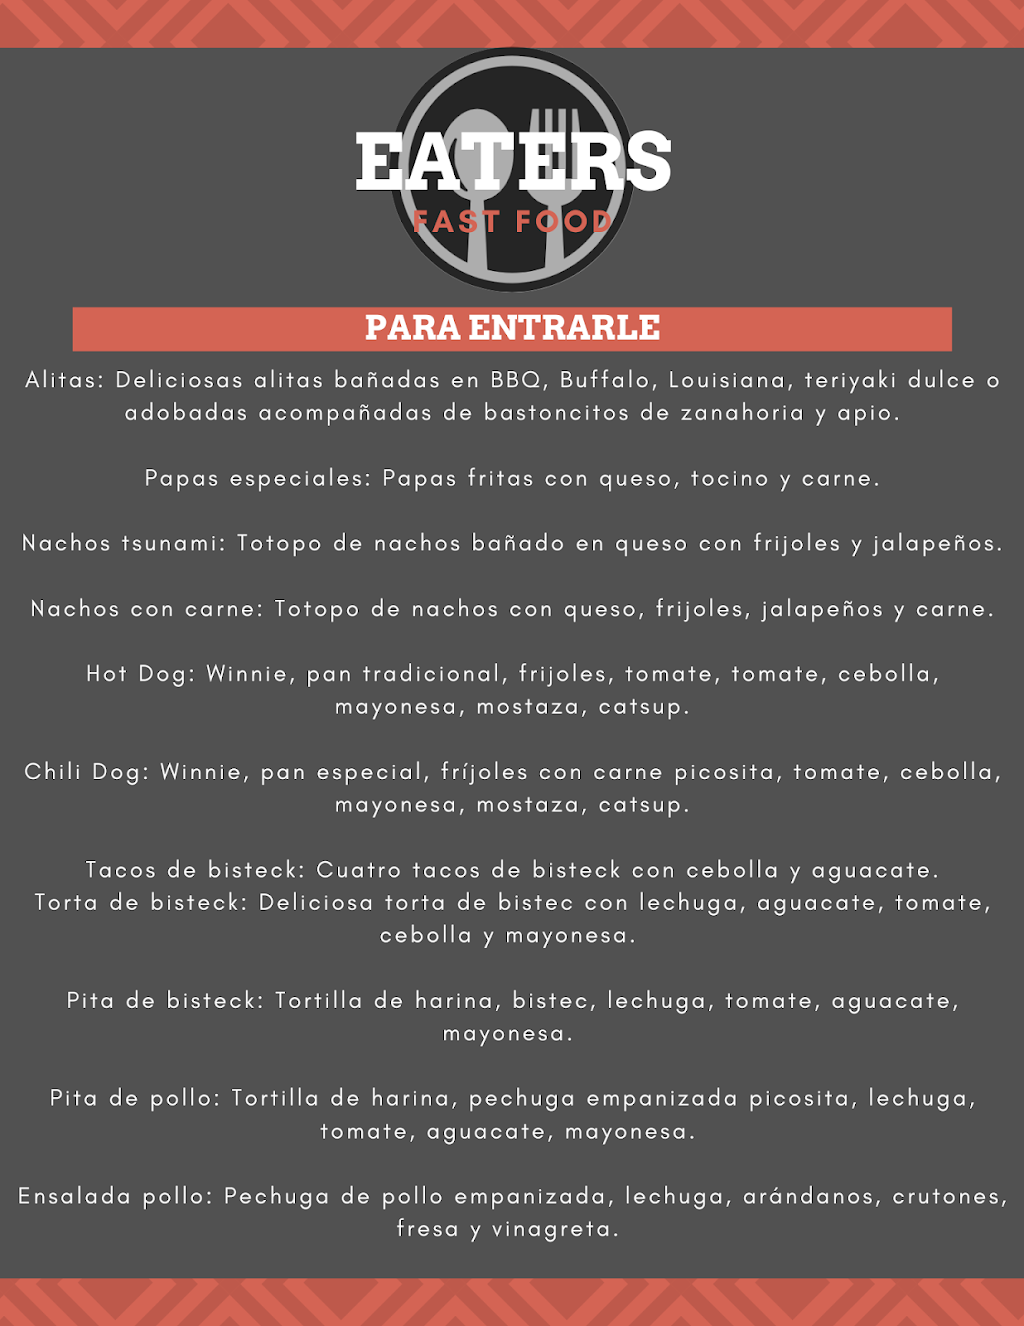 Eaters Fast Food | Monte Seco 3421, Parques Industriales, 32625 Cd Juárez, Chih., Mexico | Phone: 656 781 7165